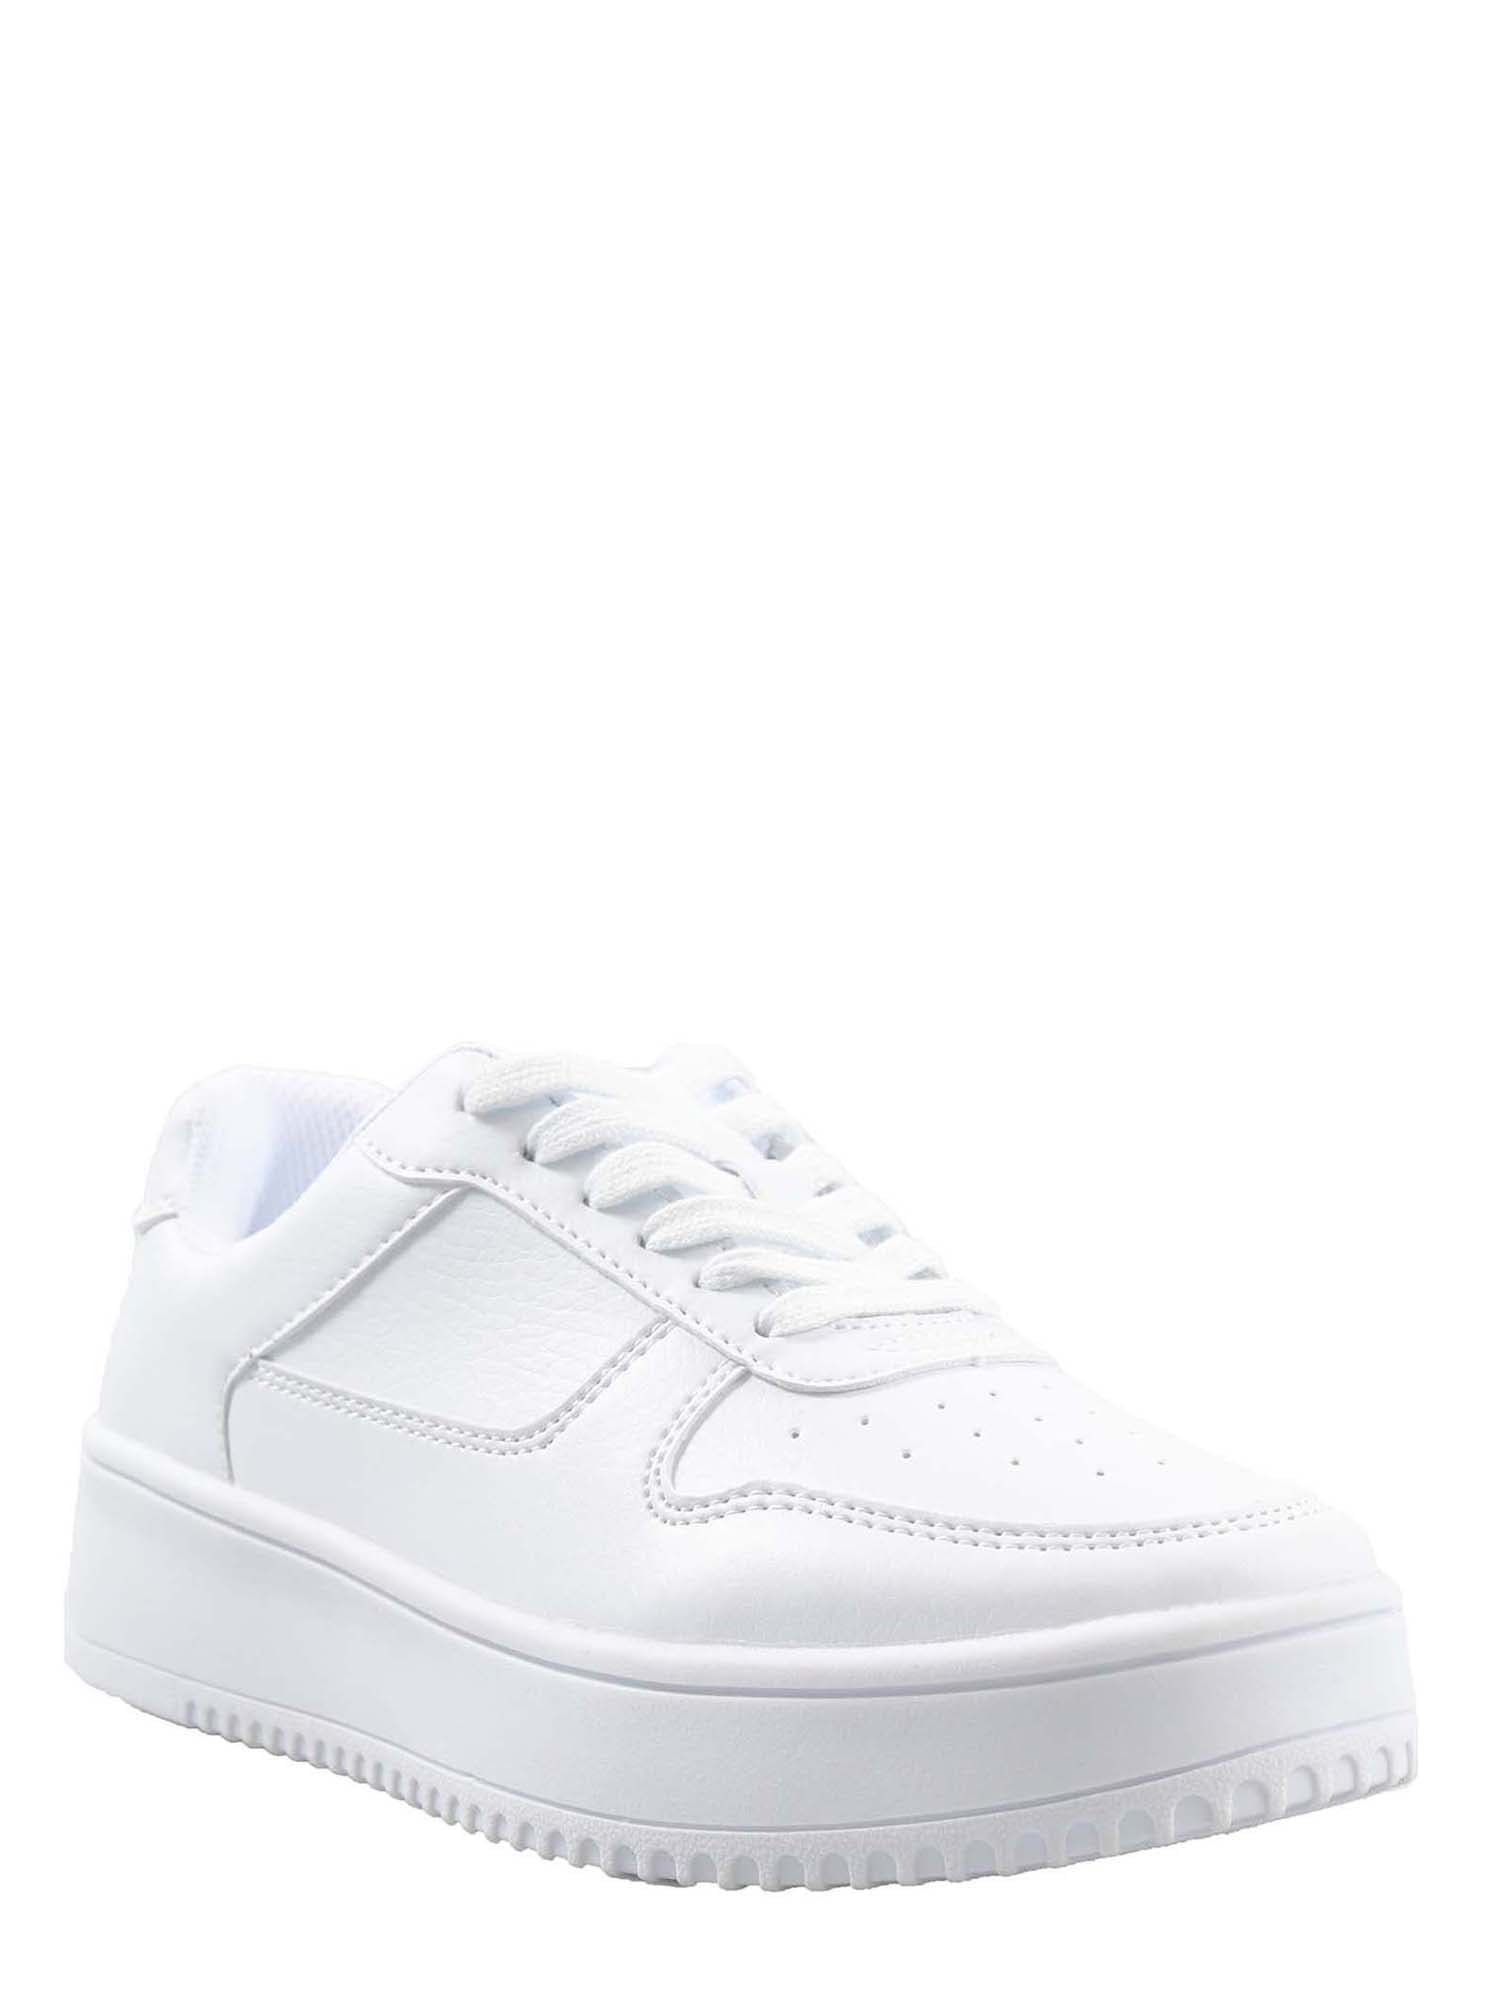 Time and Tru Shoes Womens 8 Sneakers White Canvas WMTT29DP062